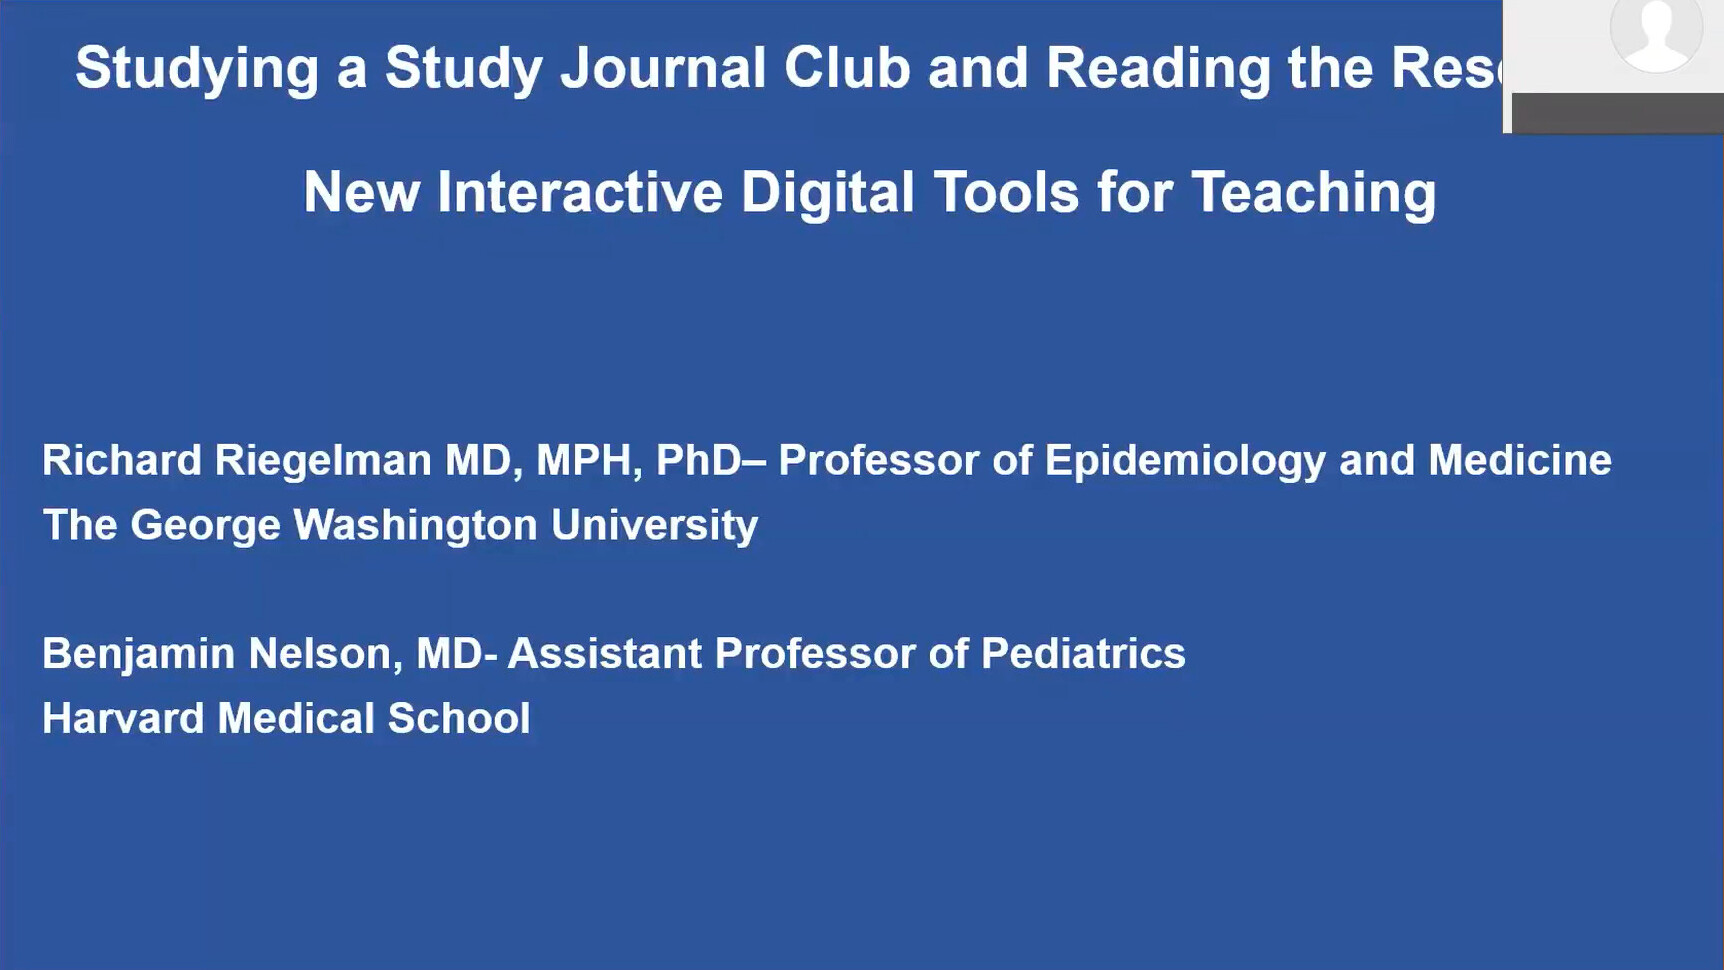 Screenshot of Studying a Study Journal Club and Reading the Research: New Interactive Digital Tools for Teaching video